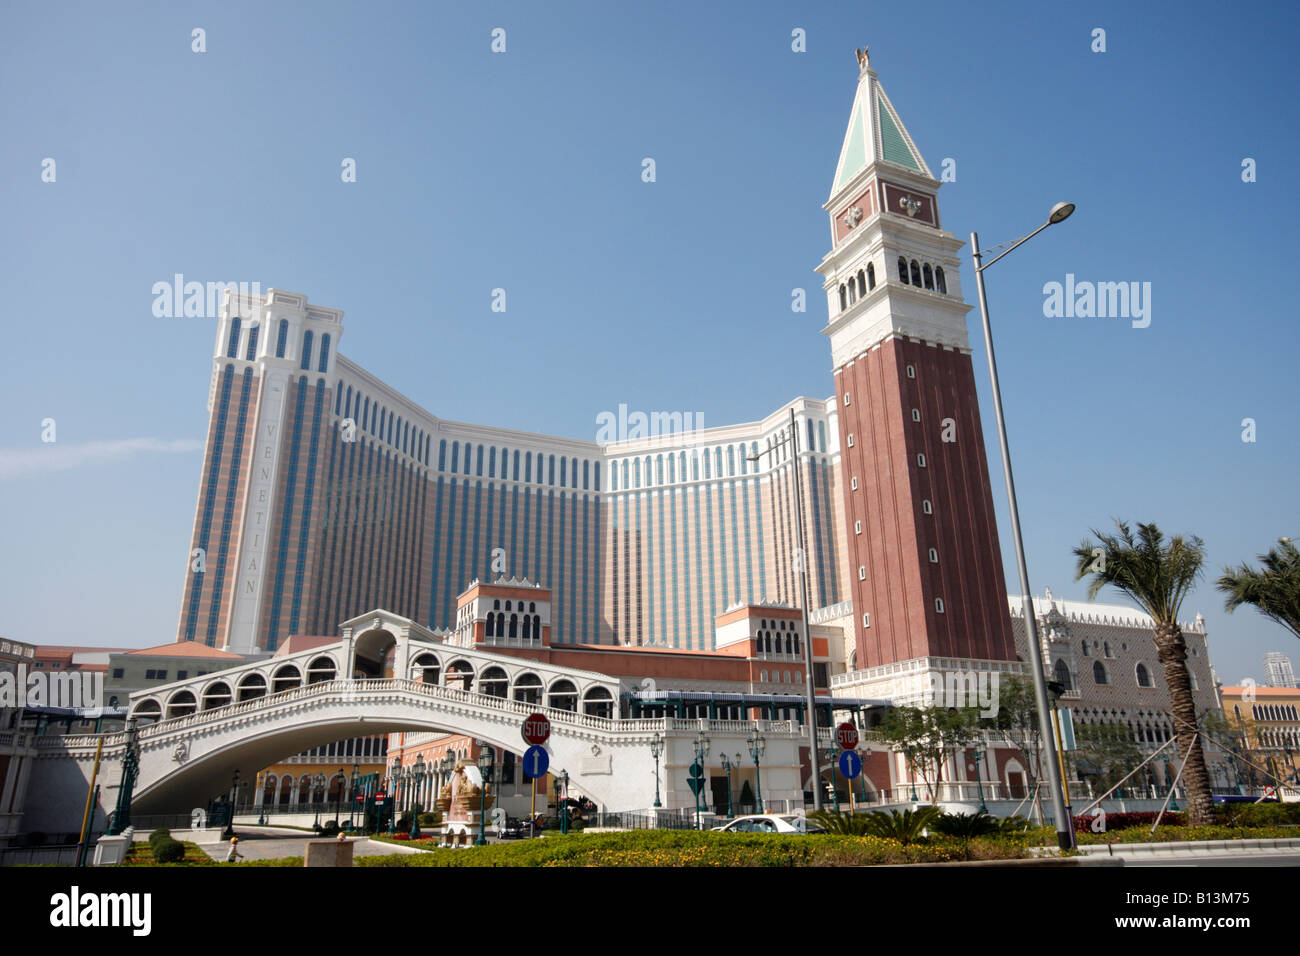 Wide angle view of Venetian Hotel and Casino in Macau, South China Stock Photo